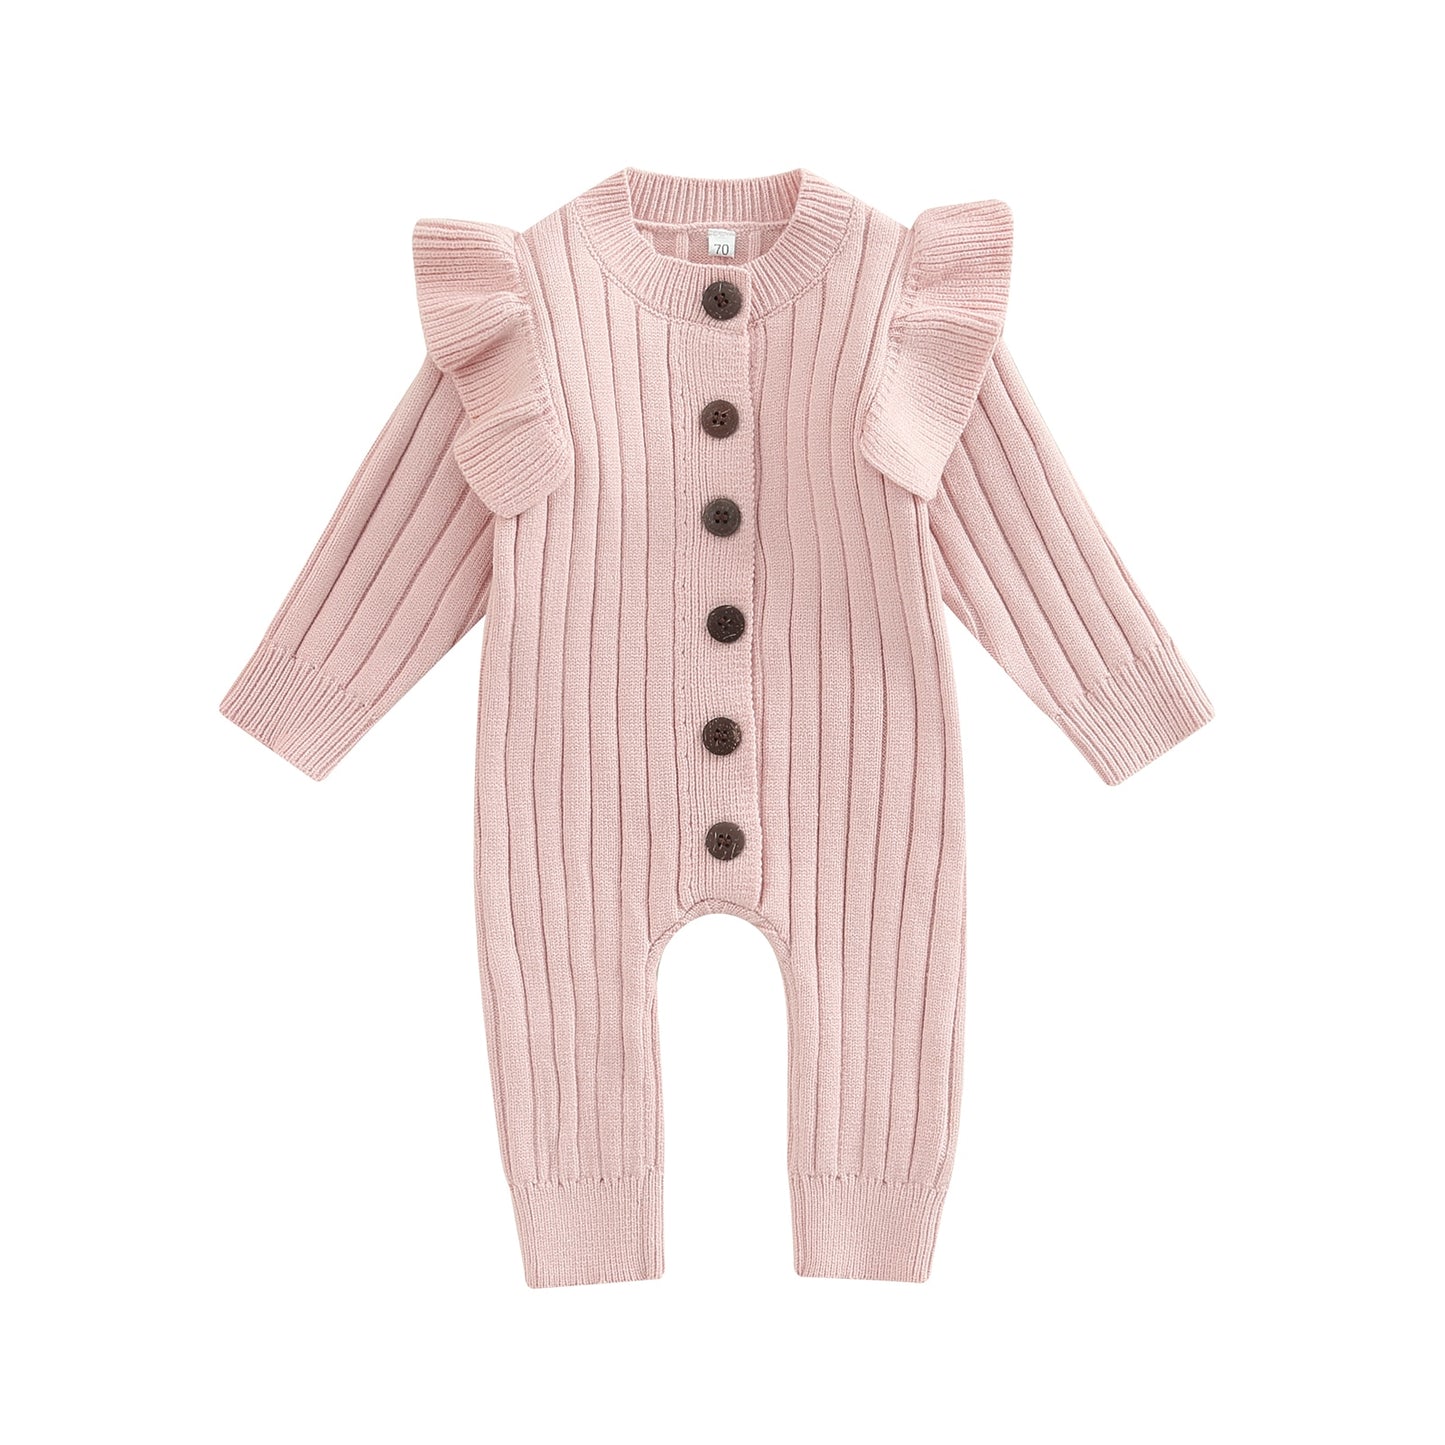 Baby Girls Toddler Fall Winter Pink Knit Ruffle Romper Jumpsuit